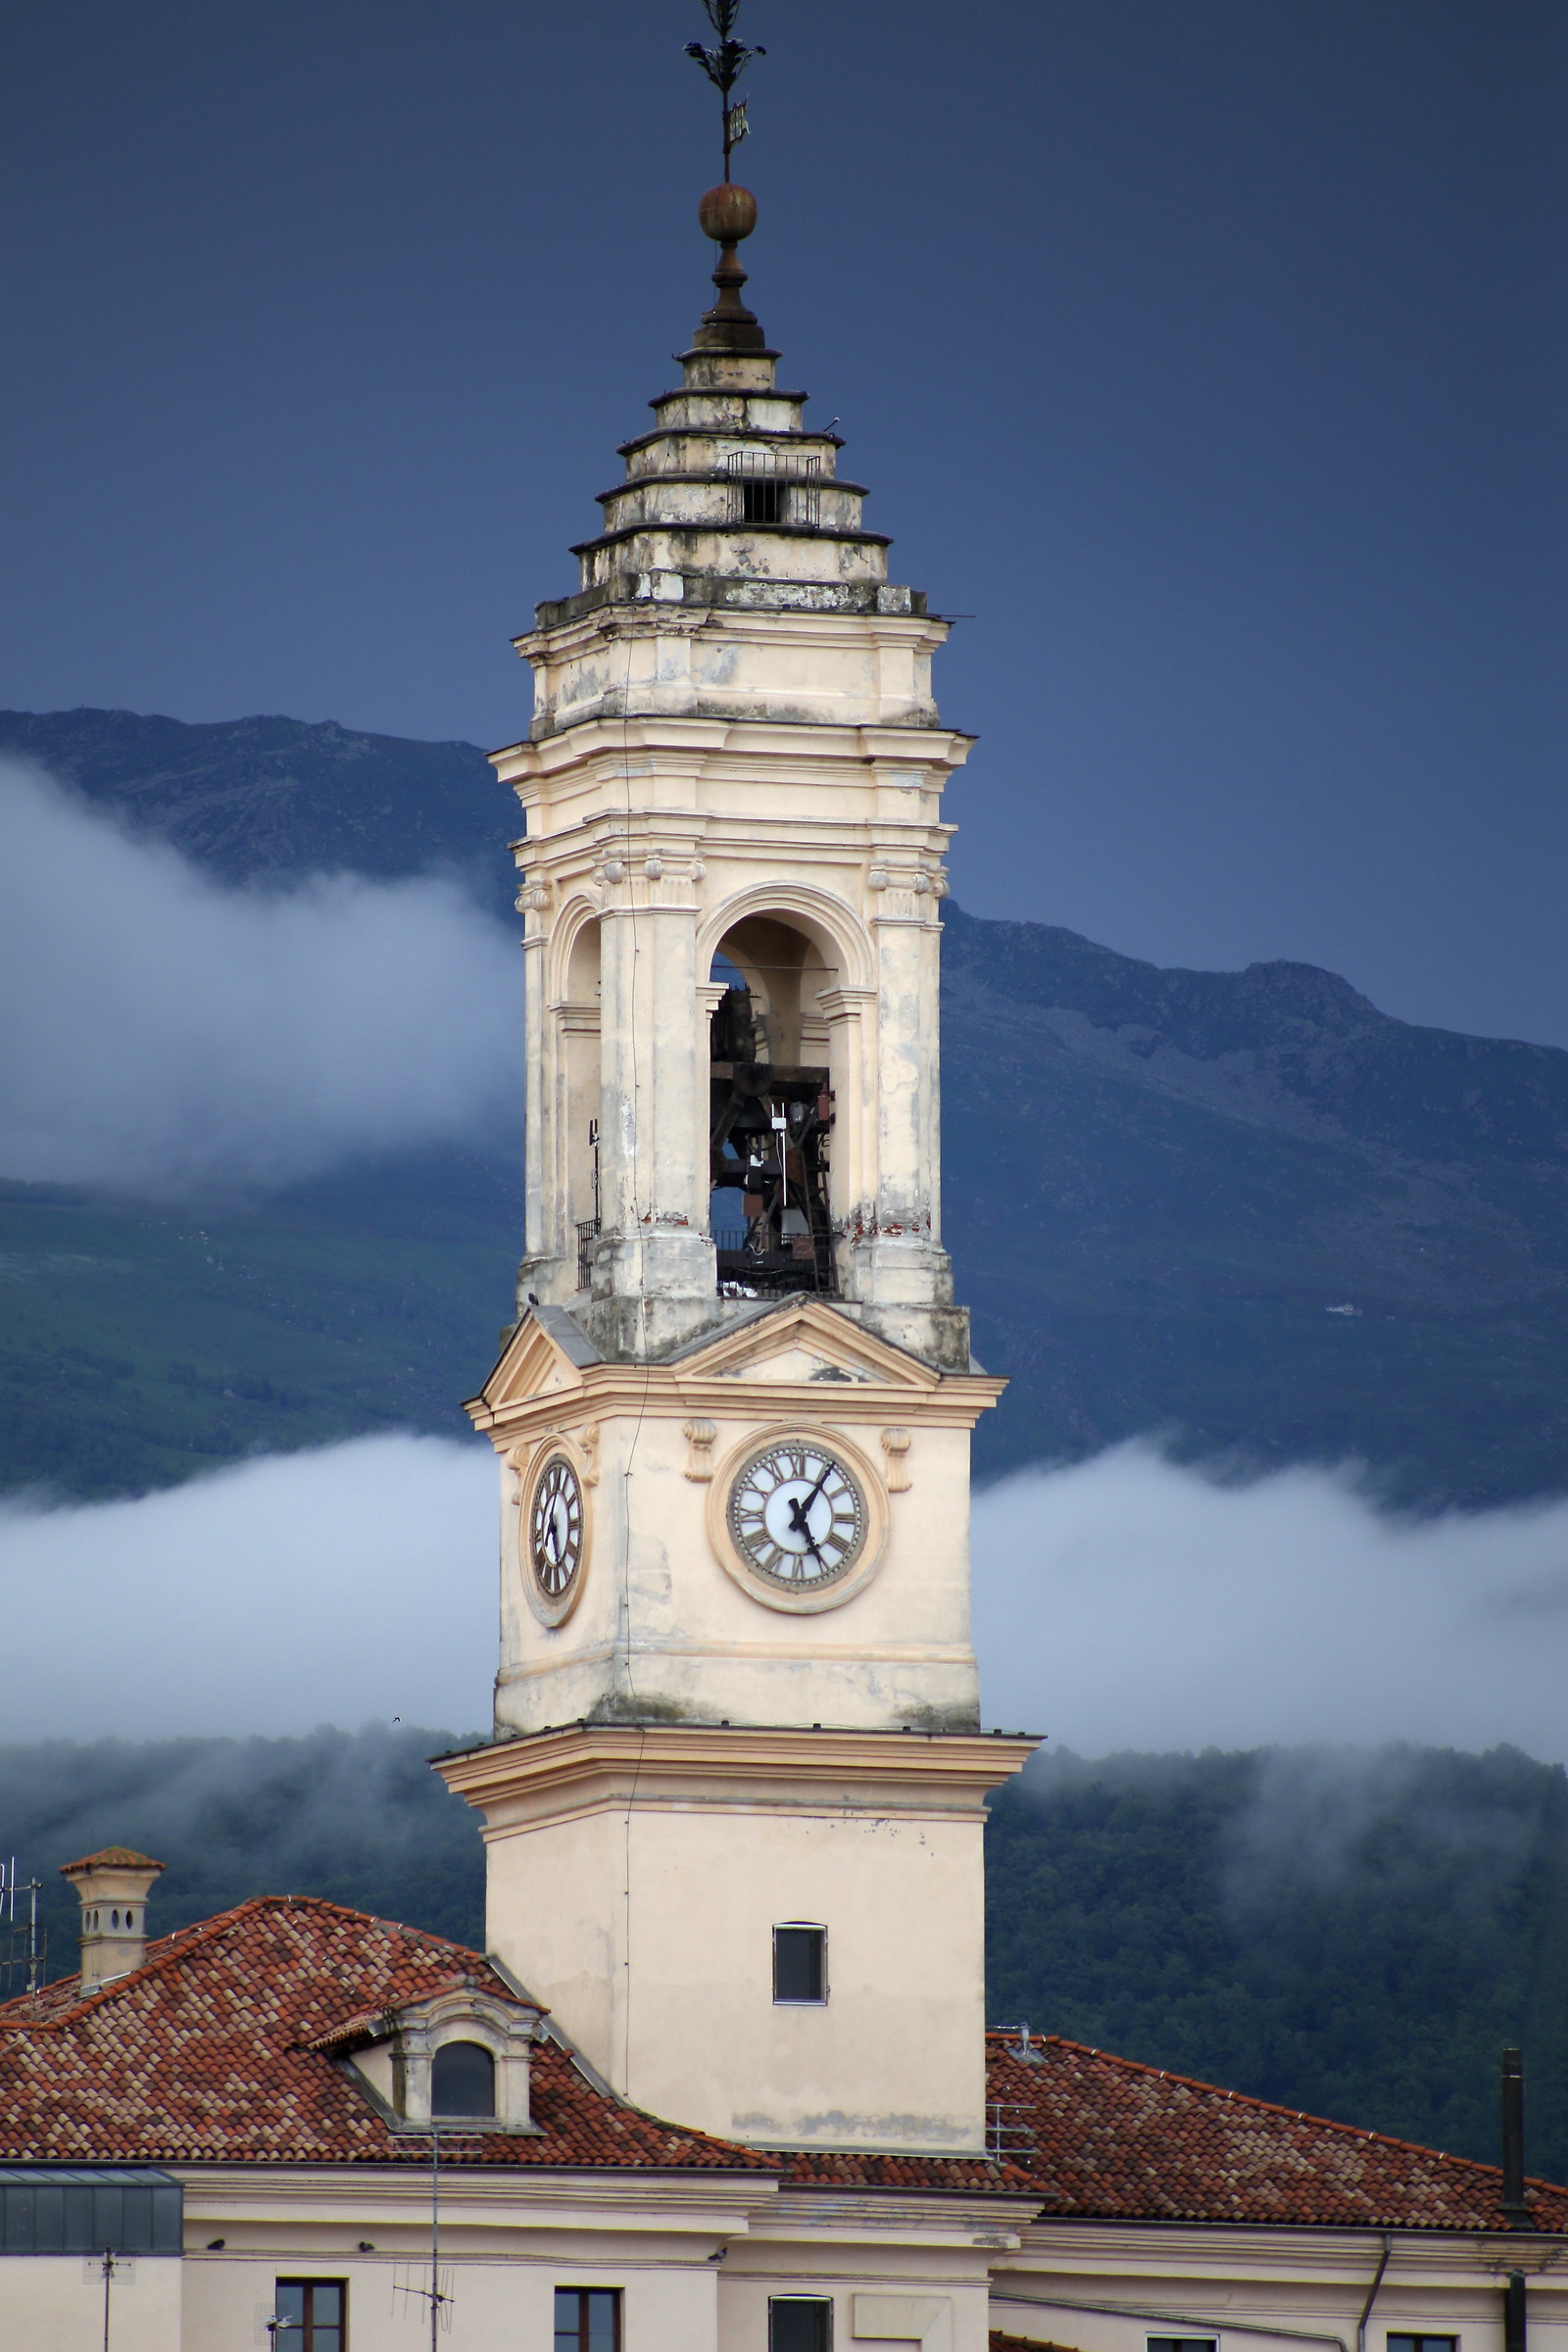 The bell tower of Ivrea...